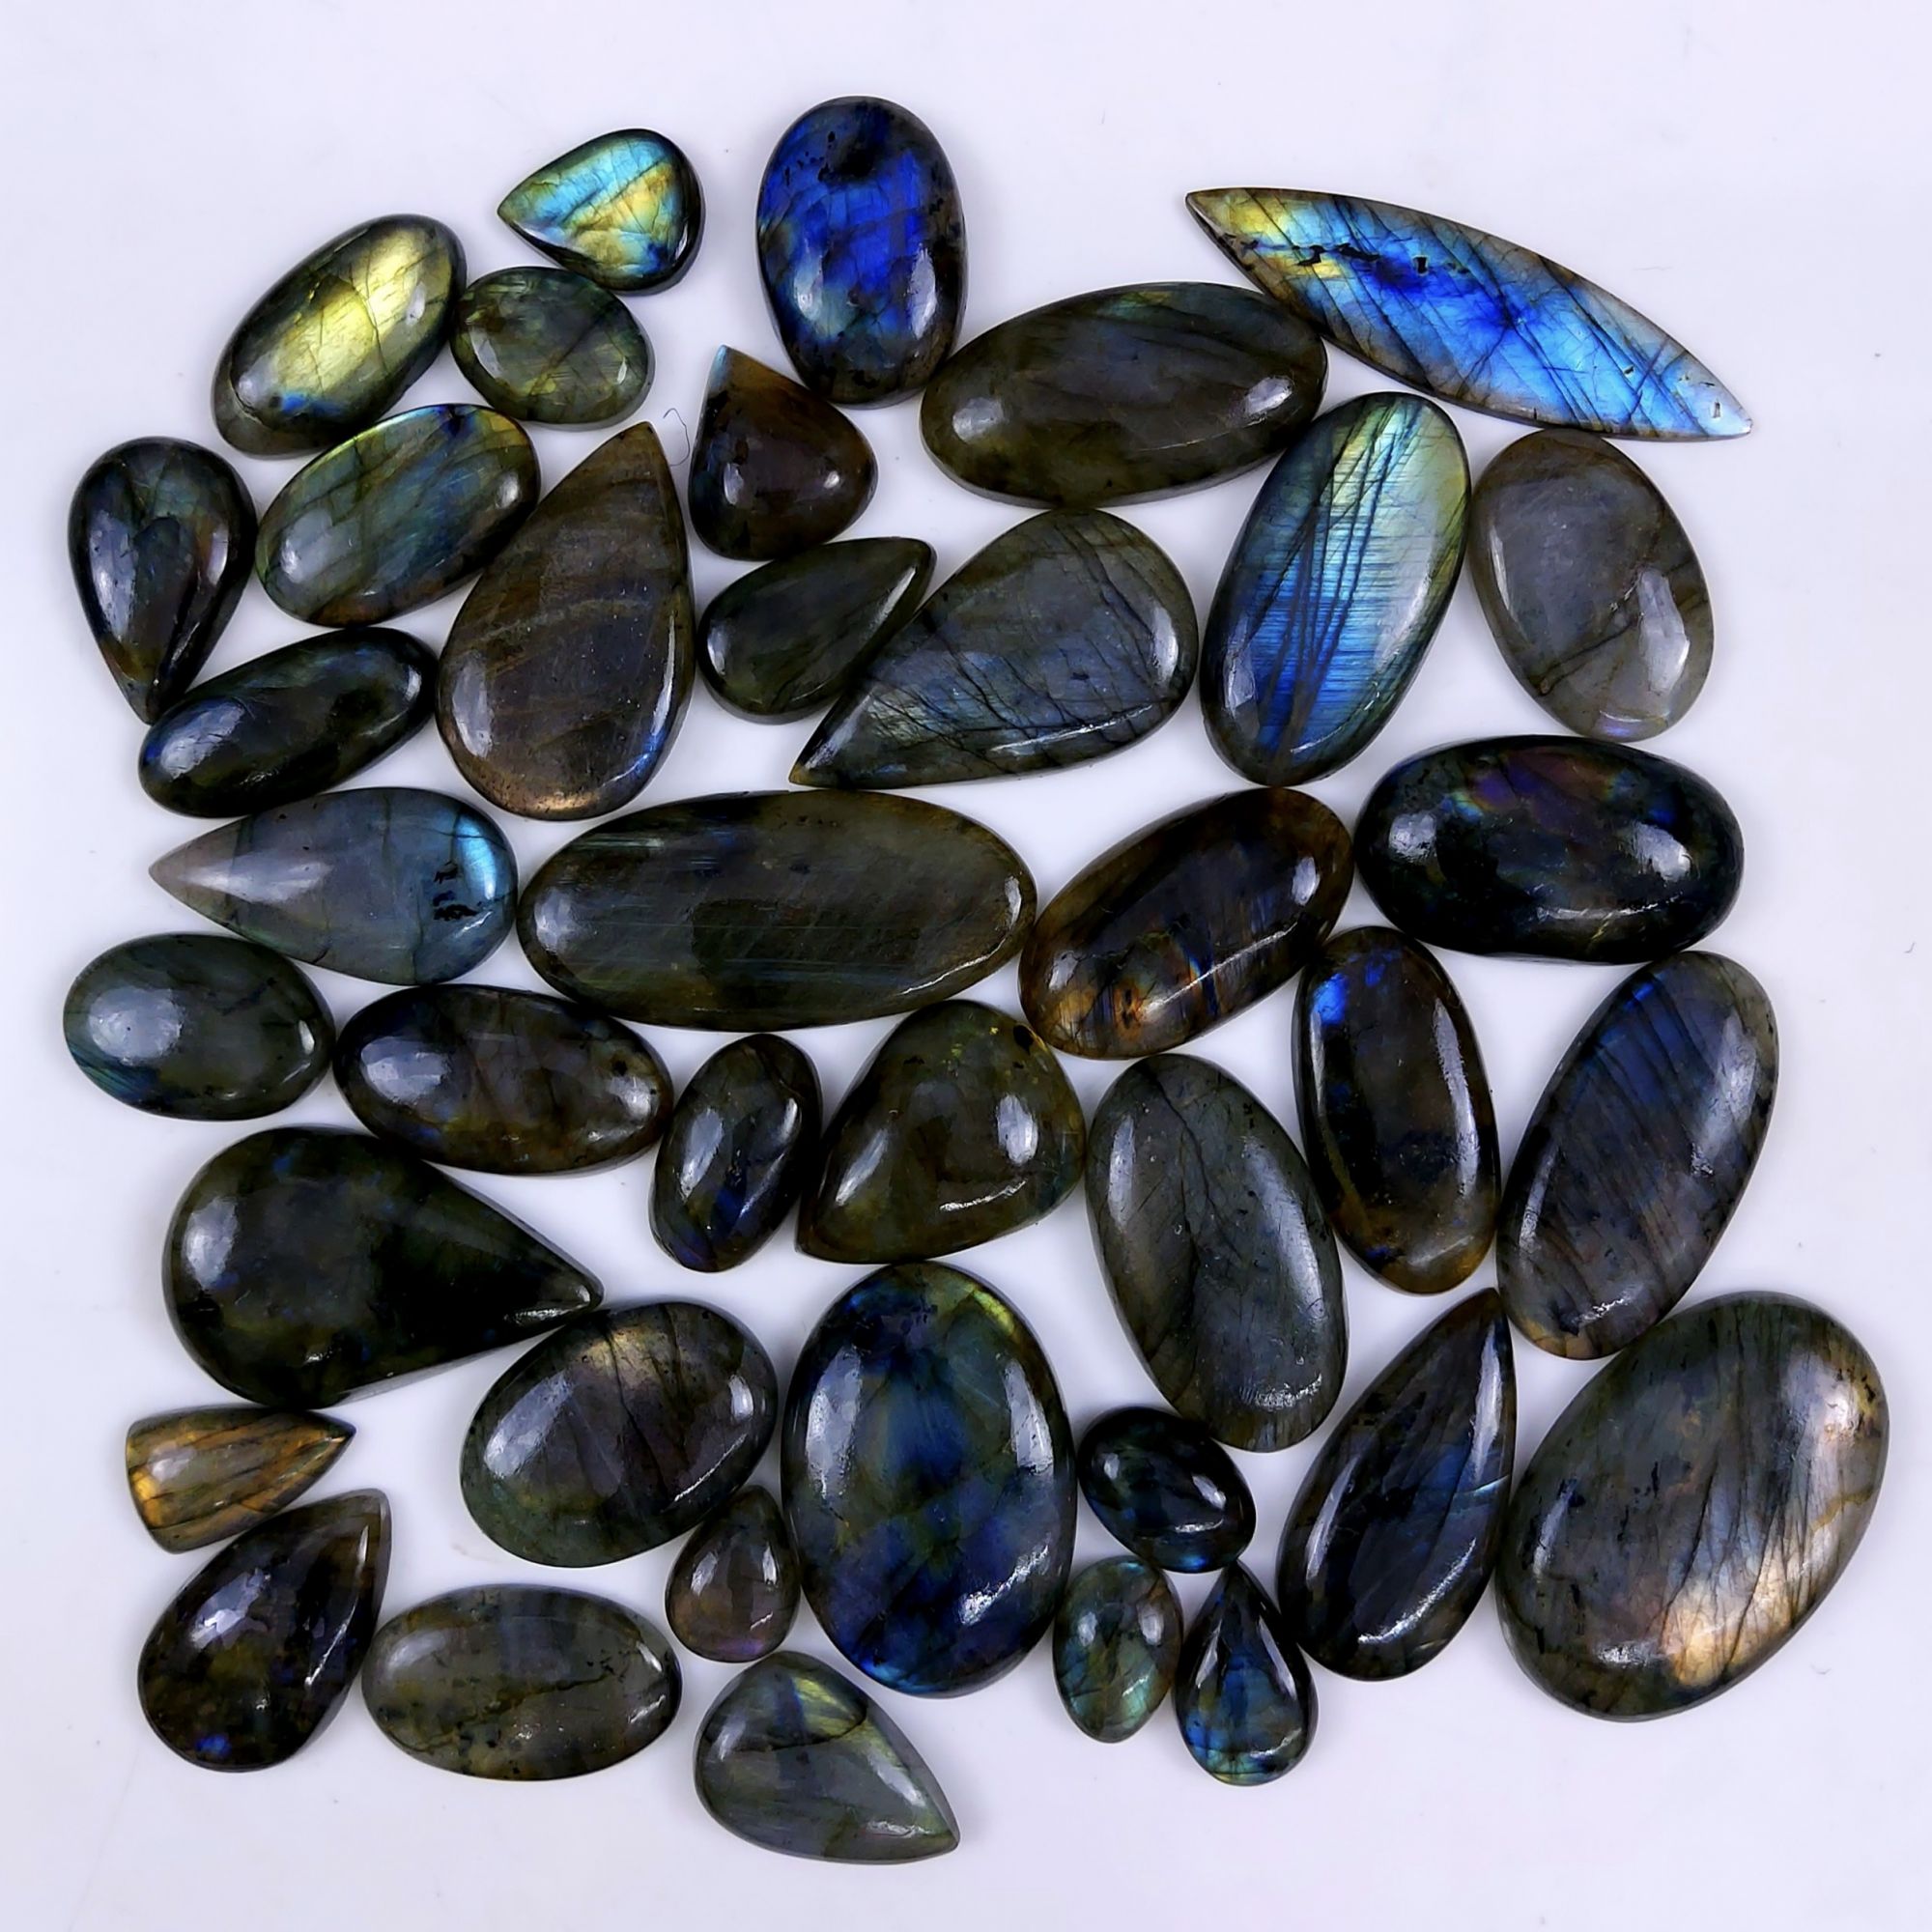 39pc 1562Cts Labradorite Cabochon Multifire Healing Crystal For Jewelry Supplies, Labradorite Necklace Handmade Wire Wrapped Gemstone Pendant 50x28 18x14mm#6317